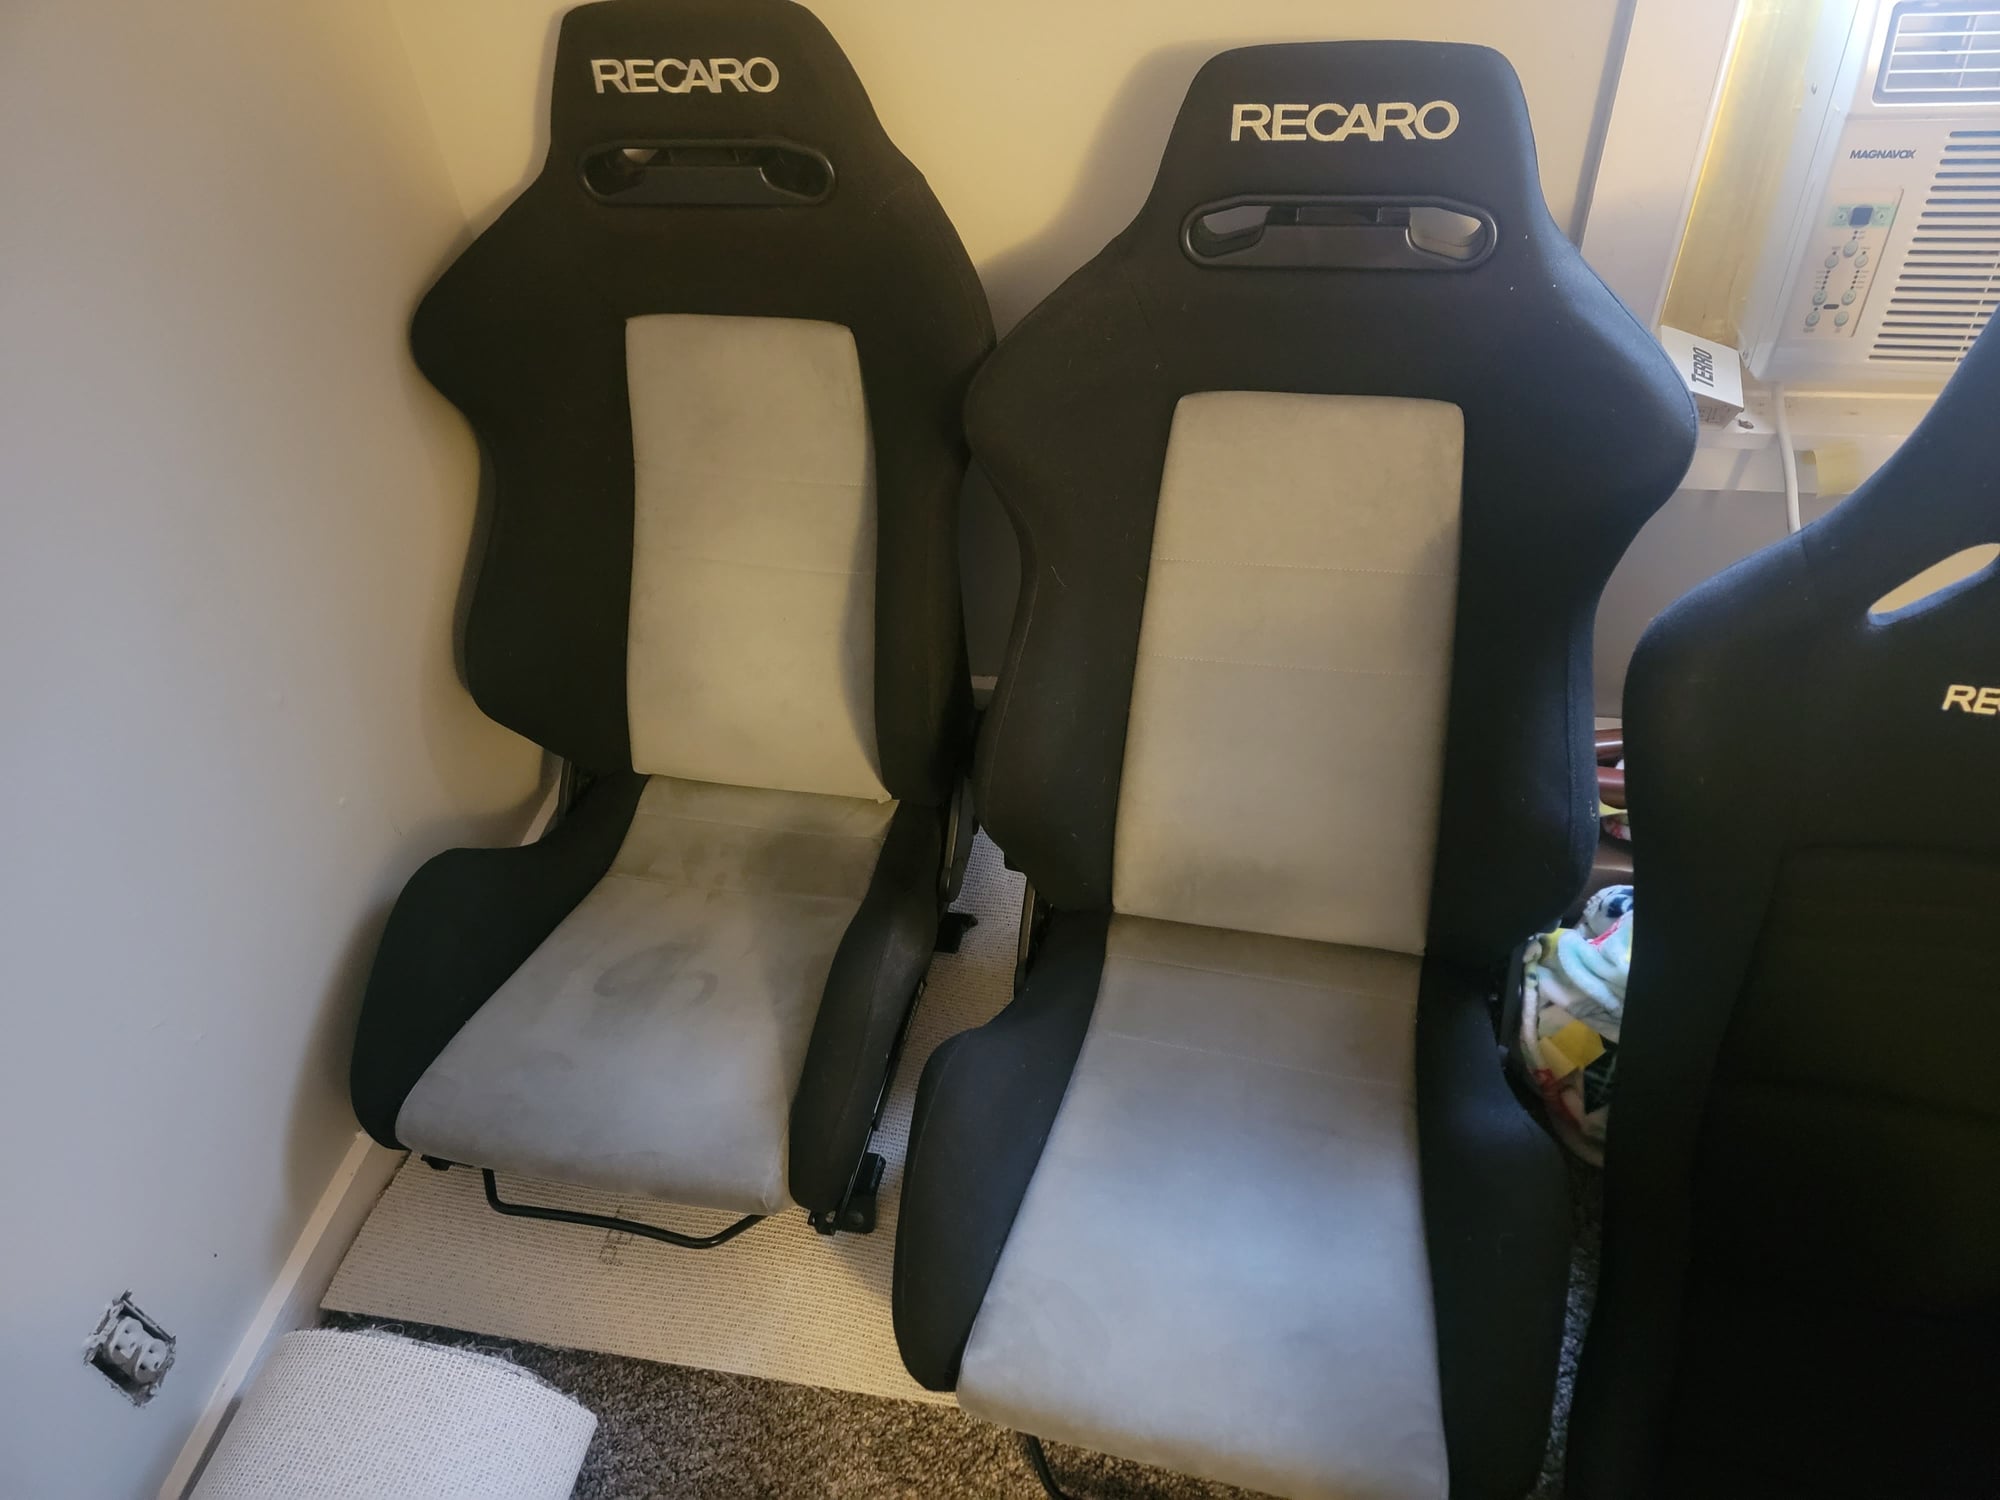 Interior/Upholstery - Like new Recaro SRD - New - 1986 to 2002 Mazda RX-7 - West Harrison, IN 47060, United States